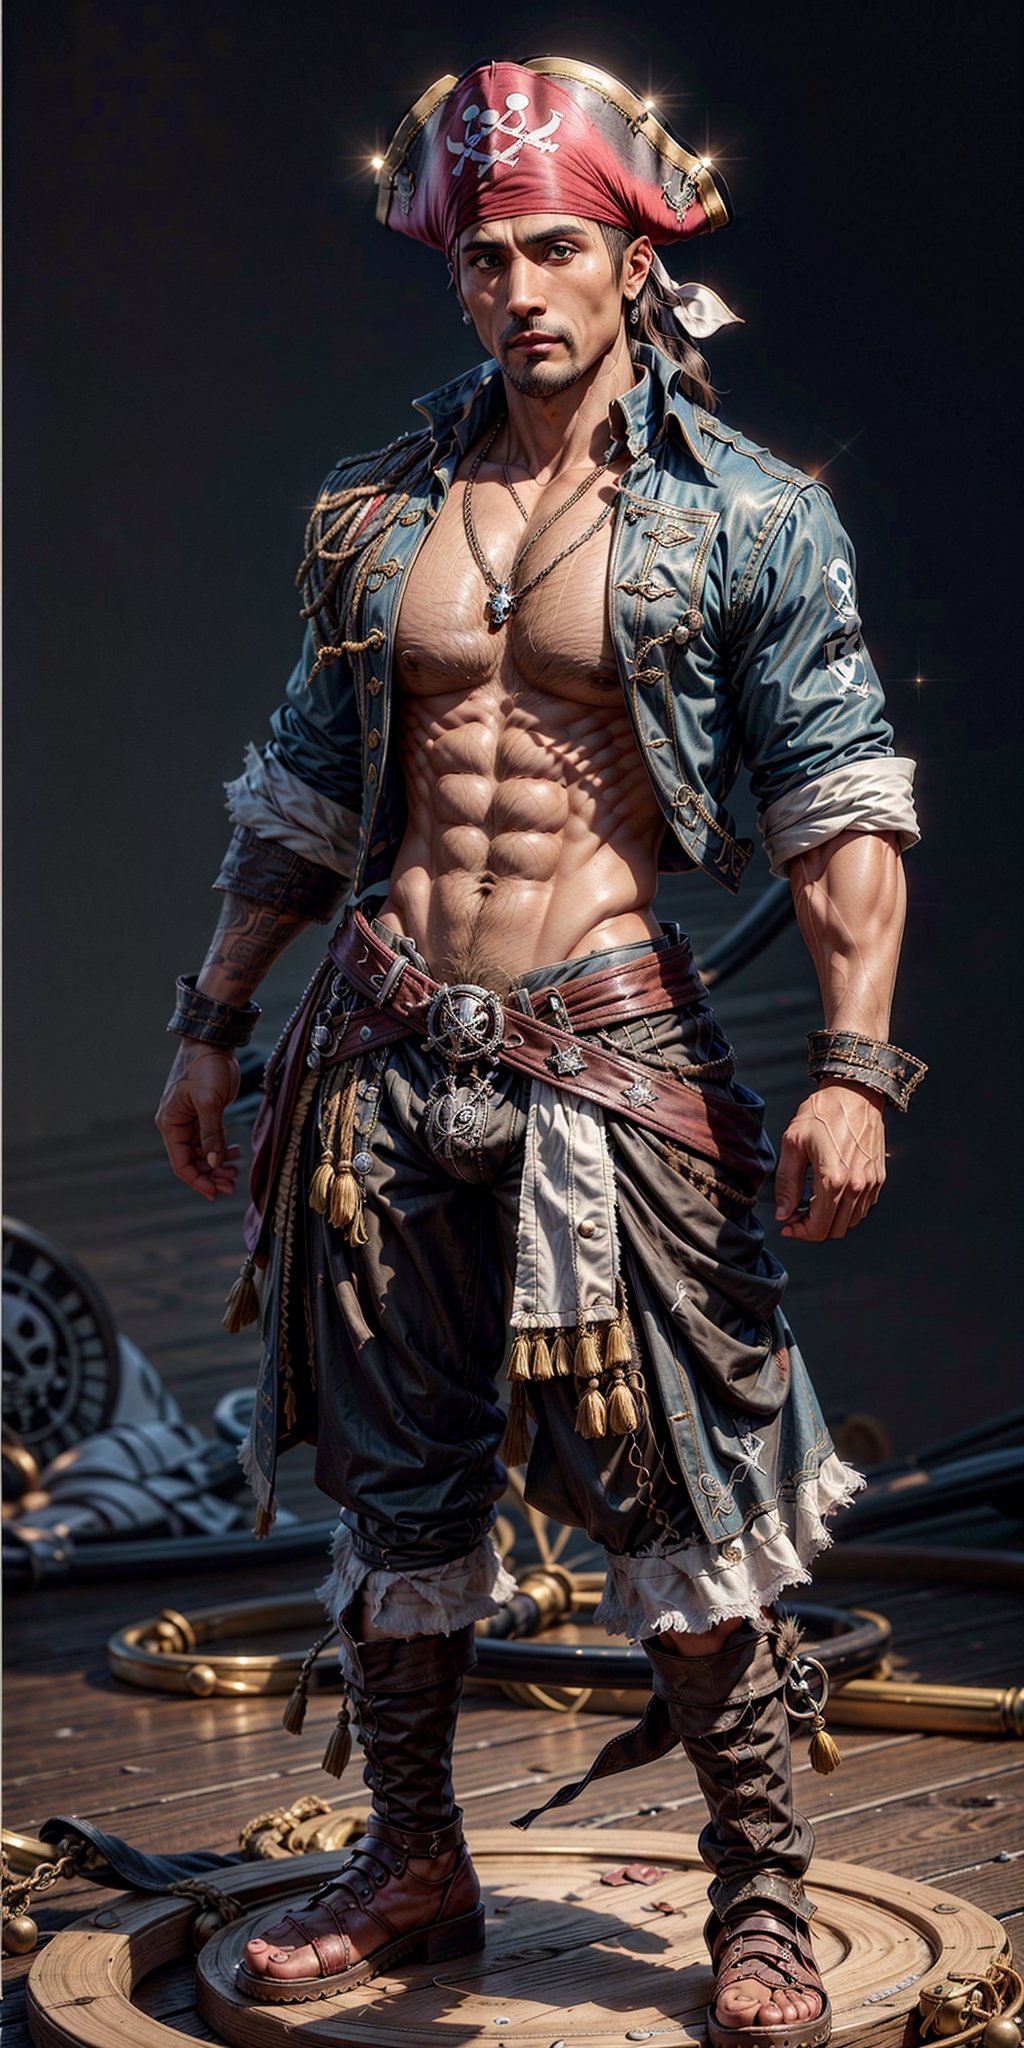 Dwayne Johnson､3d､figure､perfect muscle body､No background､
,sexypirate